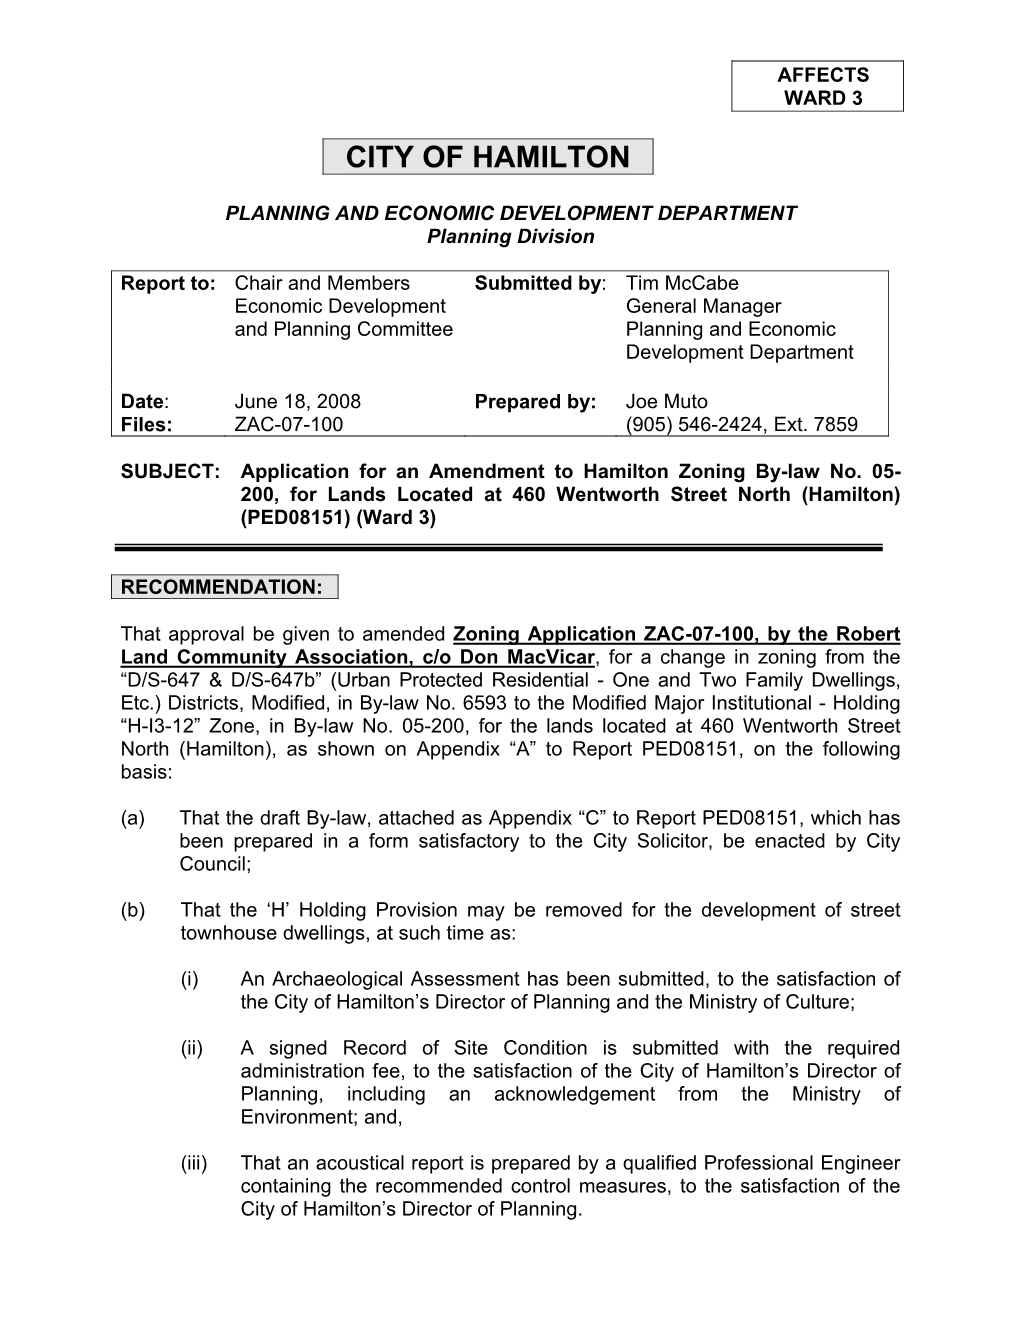 Application for an Amendment to Hamilton Zoning By-Law No. 05-200